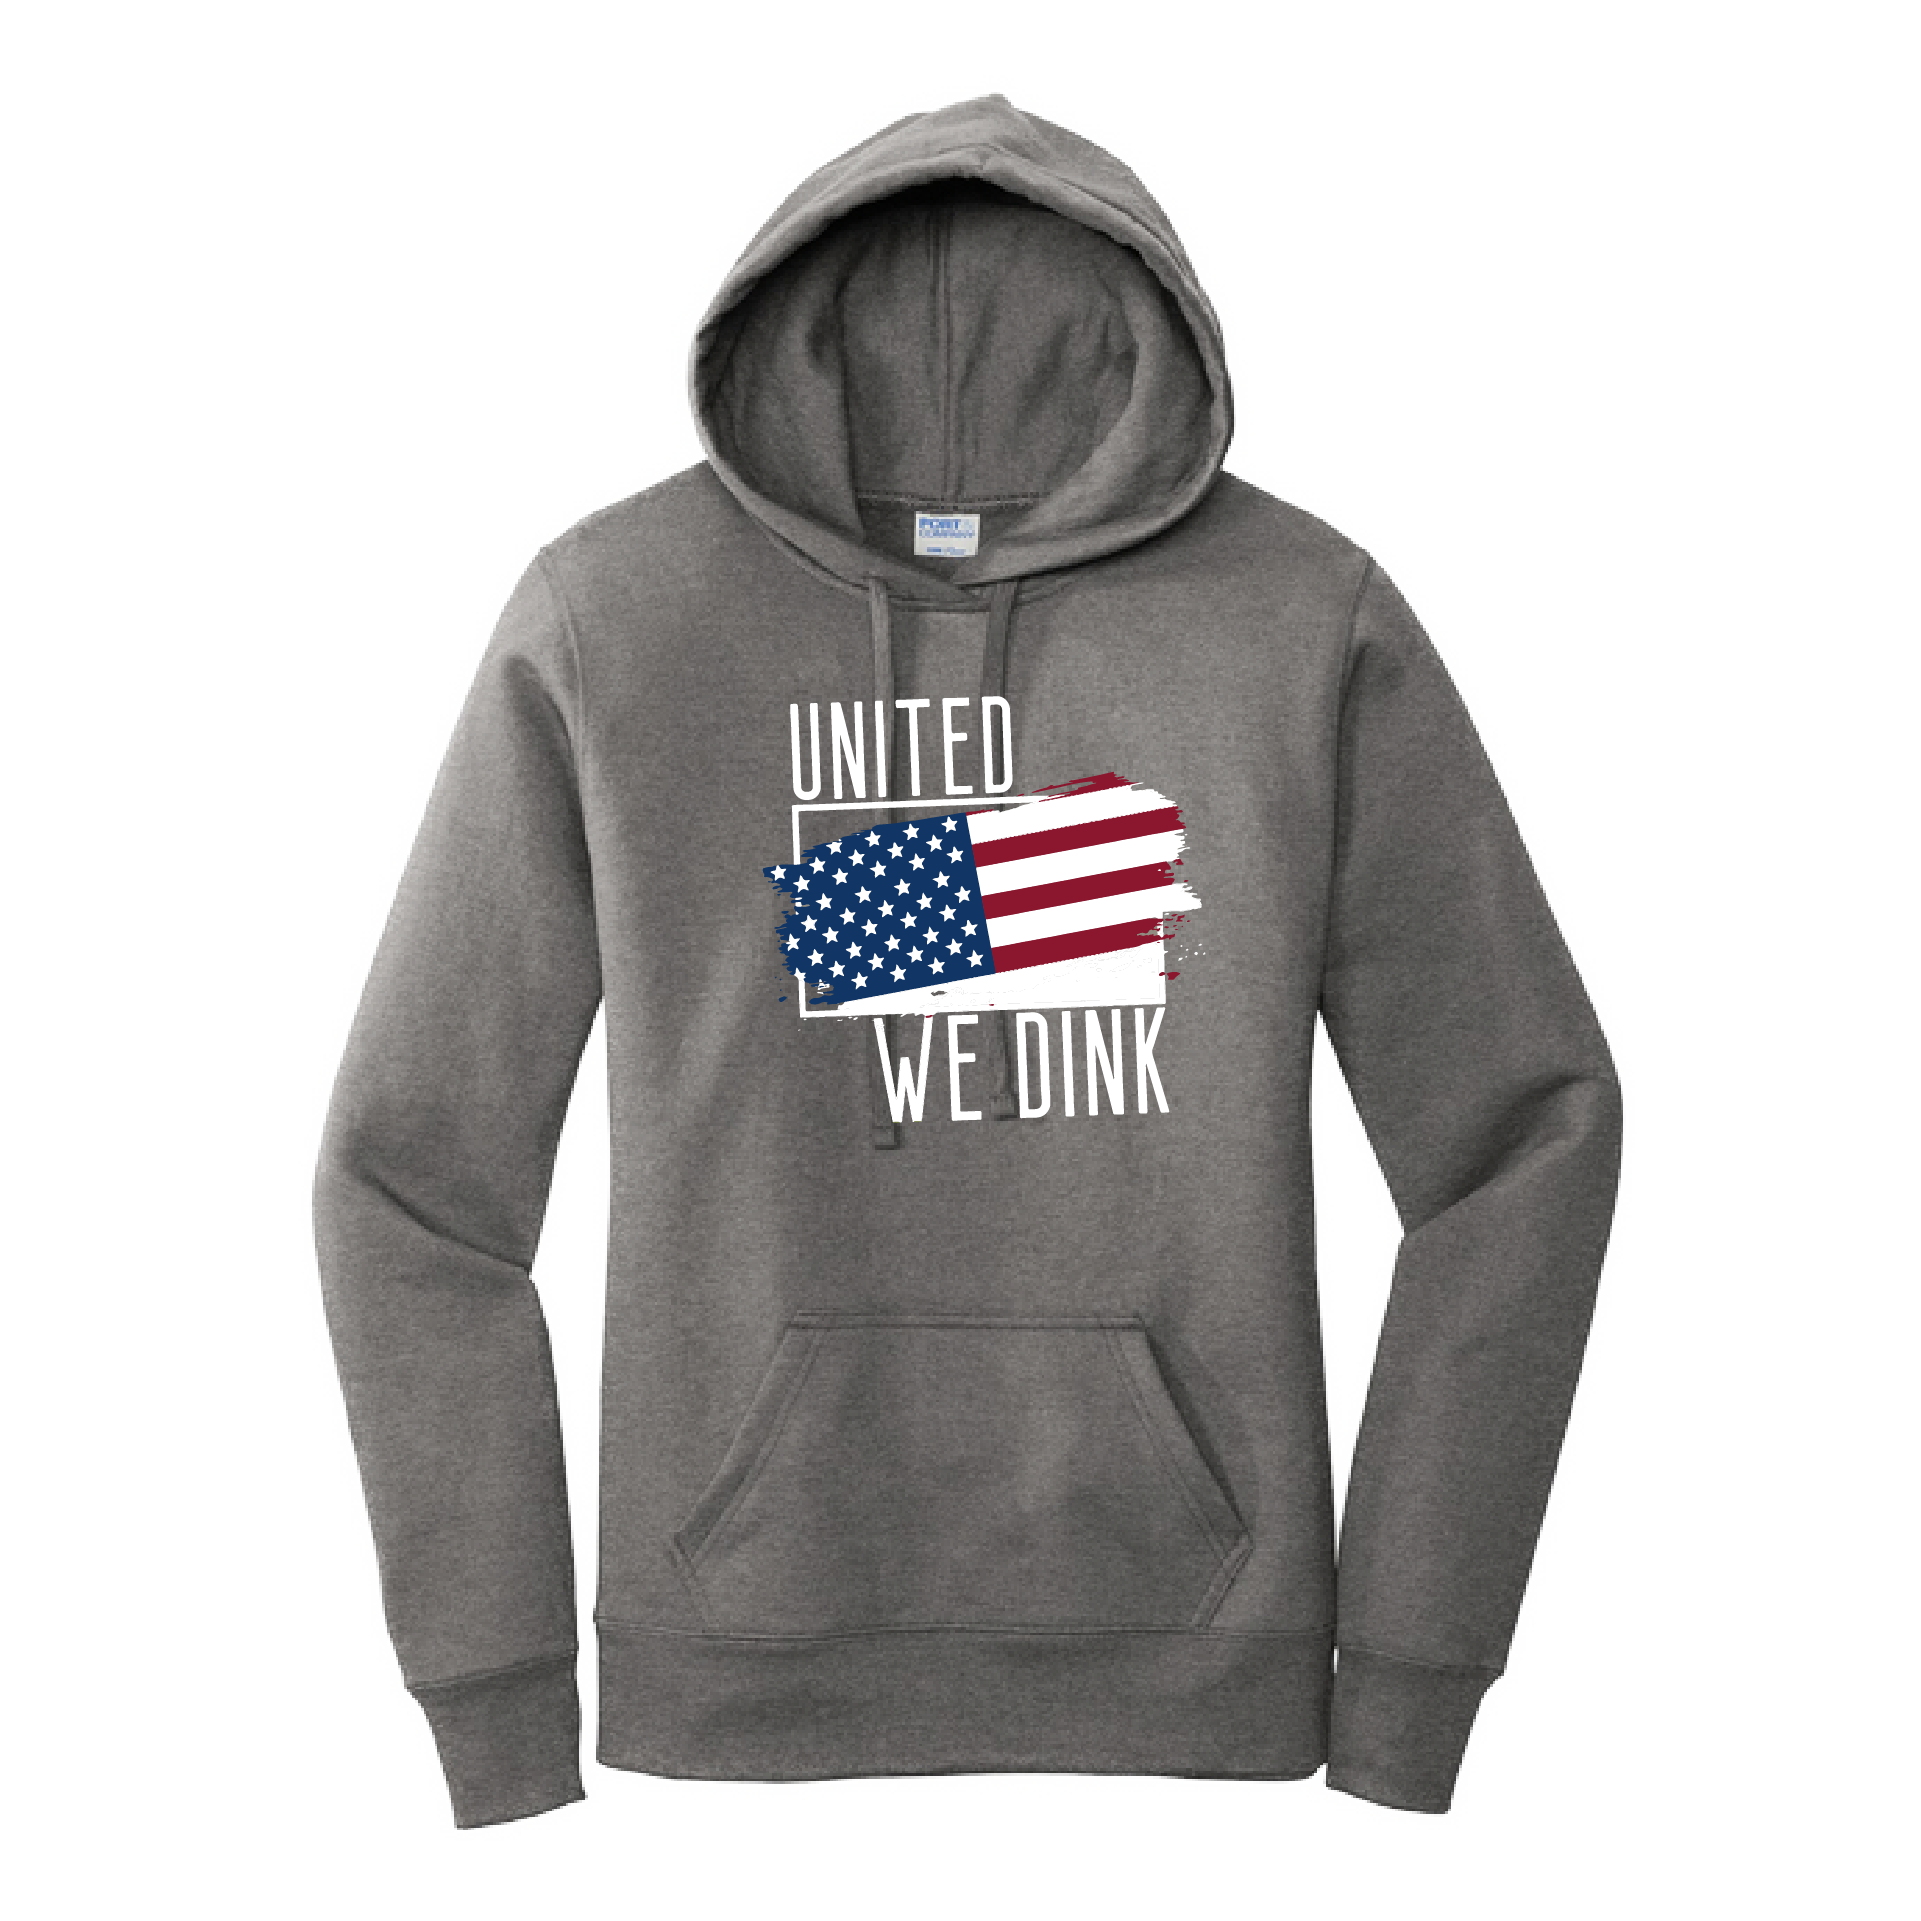 Pickleball Design: United We Dink.   Women's Hooded pullover Sweatshirt  Turn up the volume in this Women's Sweatshirts with its perfect mix of softness and attitude. Ultra soft lined inside with a lined hood also. This is fitted nicely for a women's figure. Front pouch pocket.